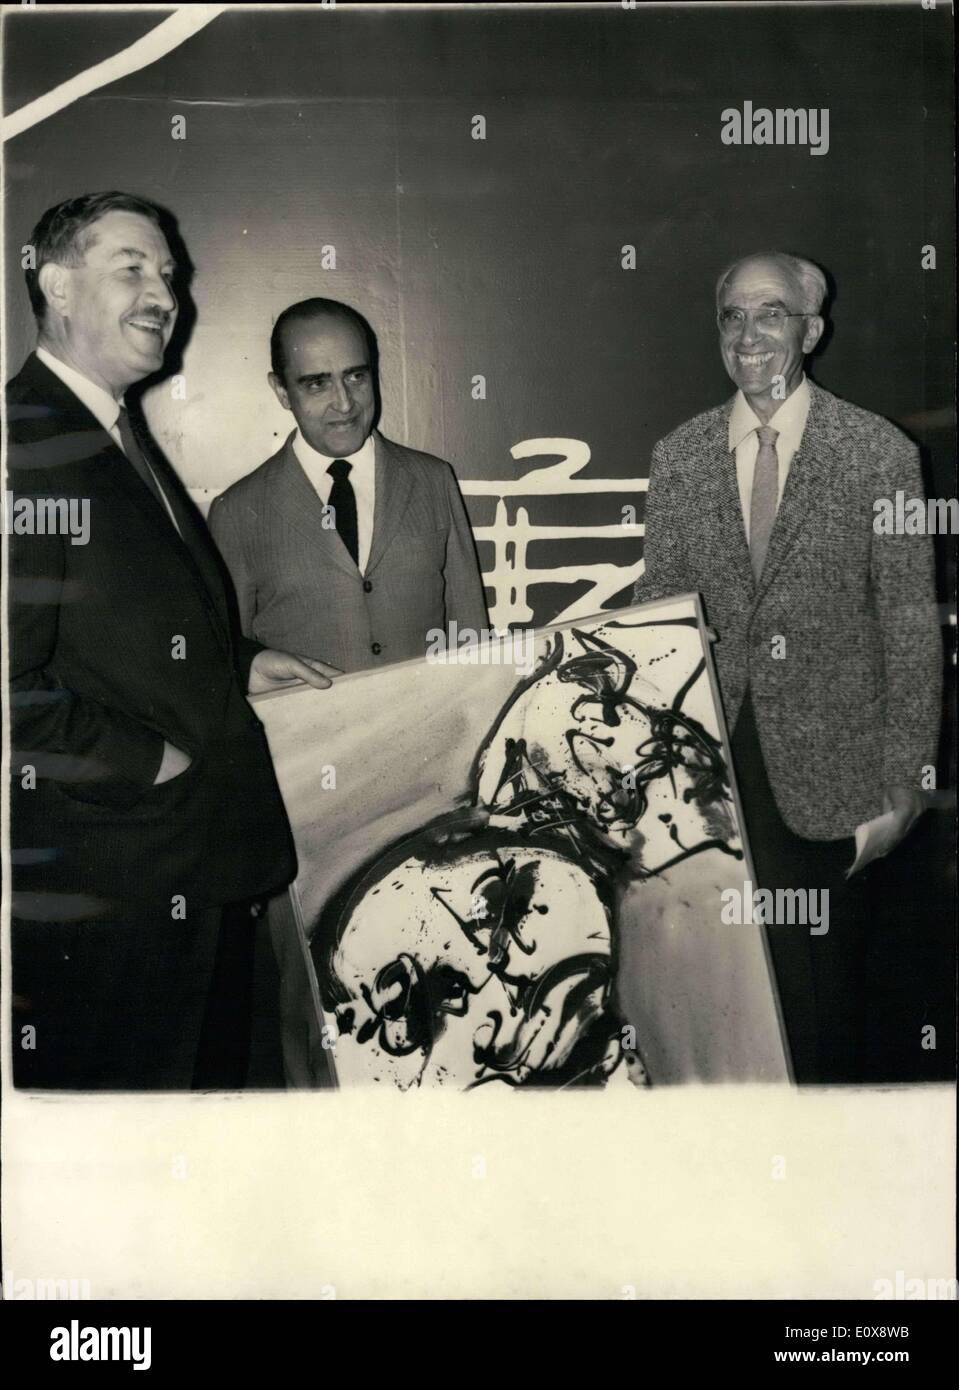 Sep. 20, 1965 - Brazil's Oscar Niemeyer won International Art and Architecture Grand Prize. Here is Jury President Andre Bloc (right), Niemeyer, and President of the Central Decorative Arts Union, Claudius Petit with a Ruth Francken painting. Stock Photo